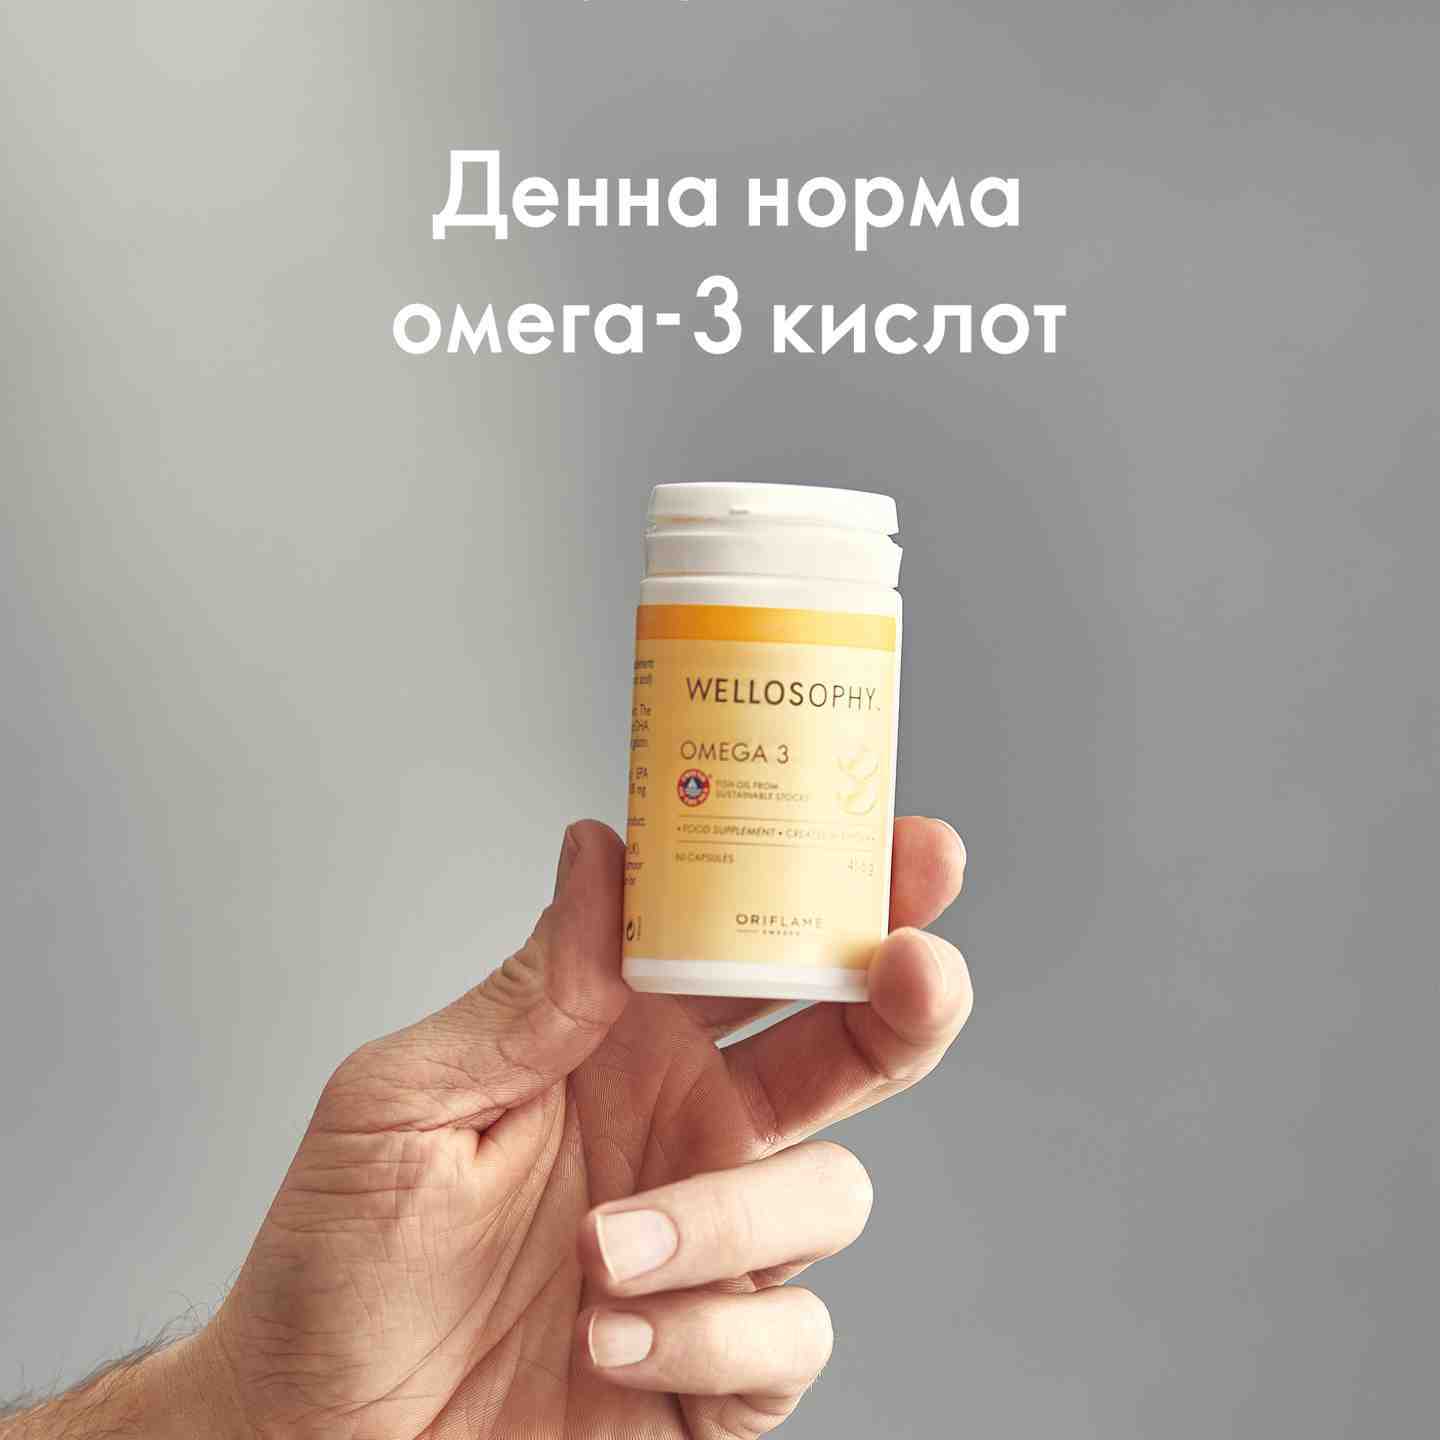 https://media-cdn.oriflame.com/productImage?externalMediaId=product-management-media%2fProducts%2f38556%2fUA%2f38556_4.png&id=18407477&version=1